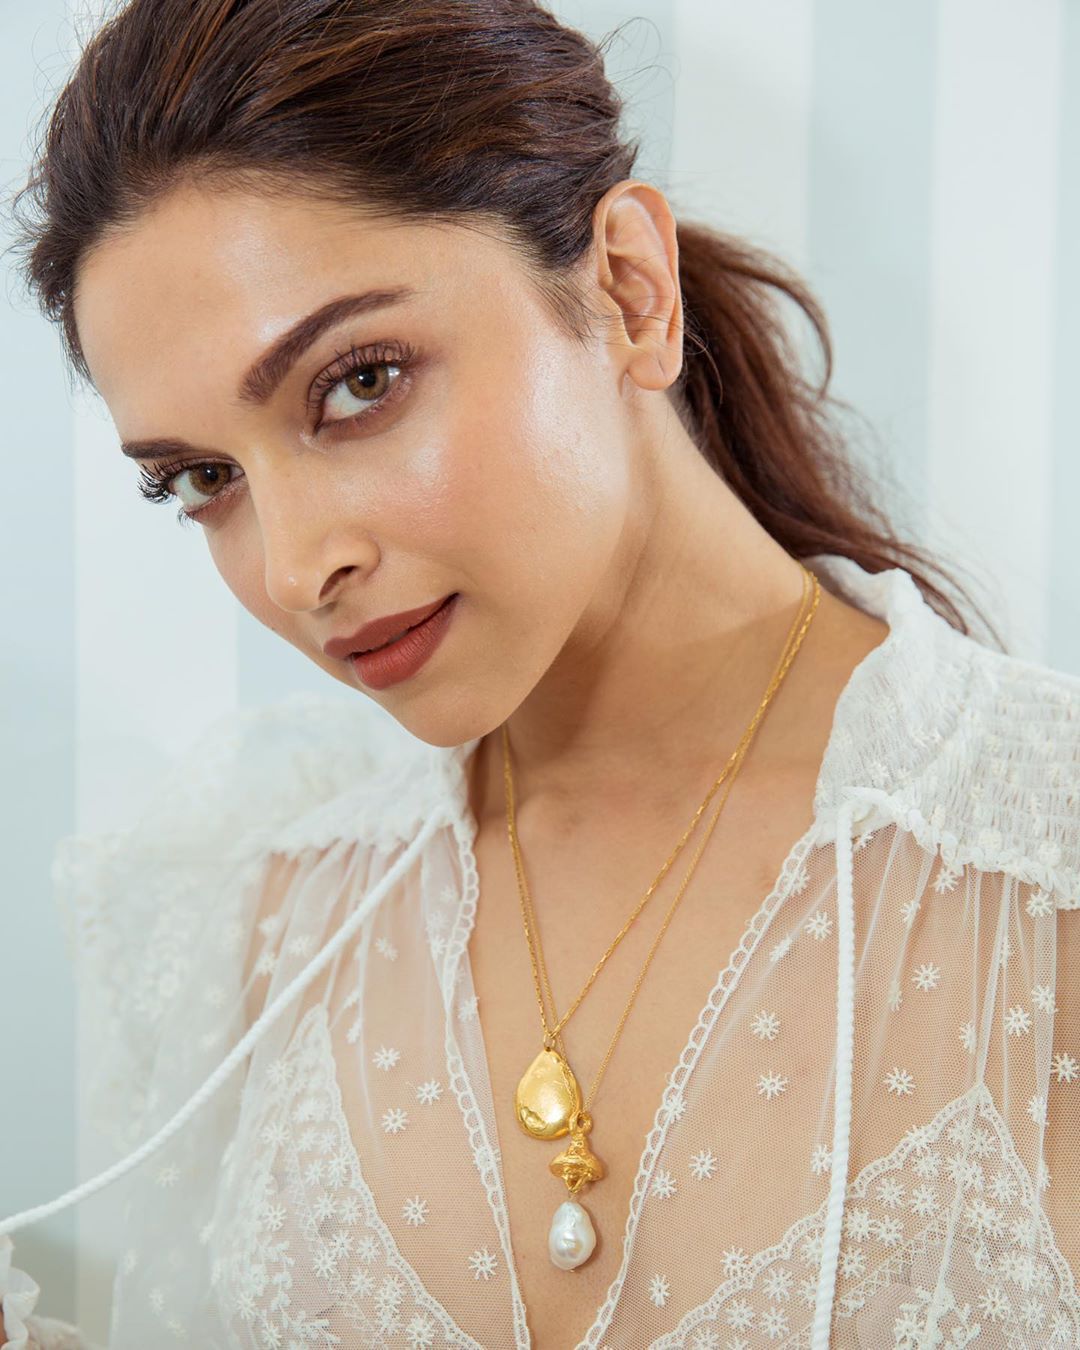 Layered necklaces is the hottest jewellery trend celebs are